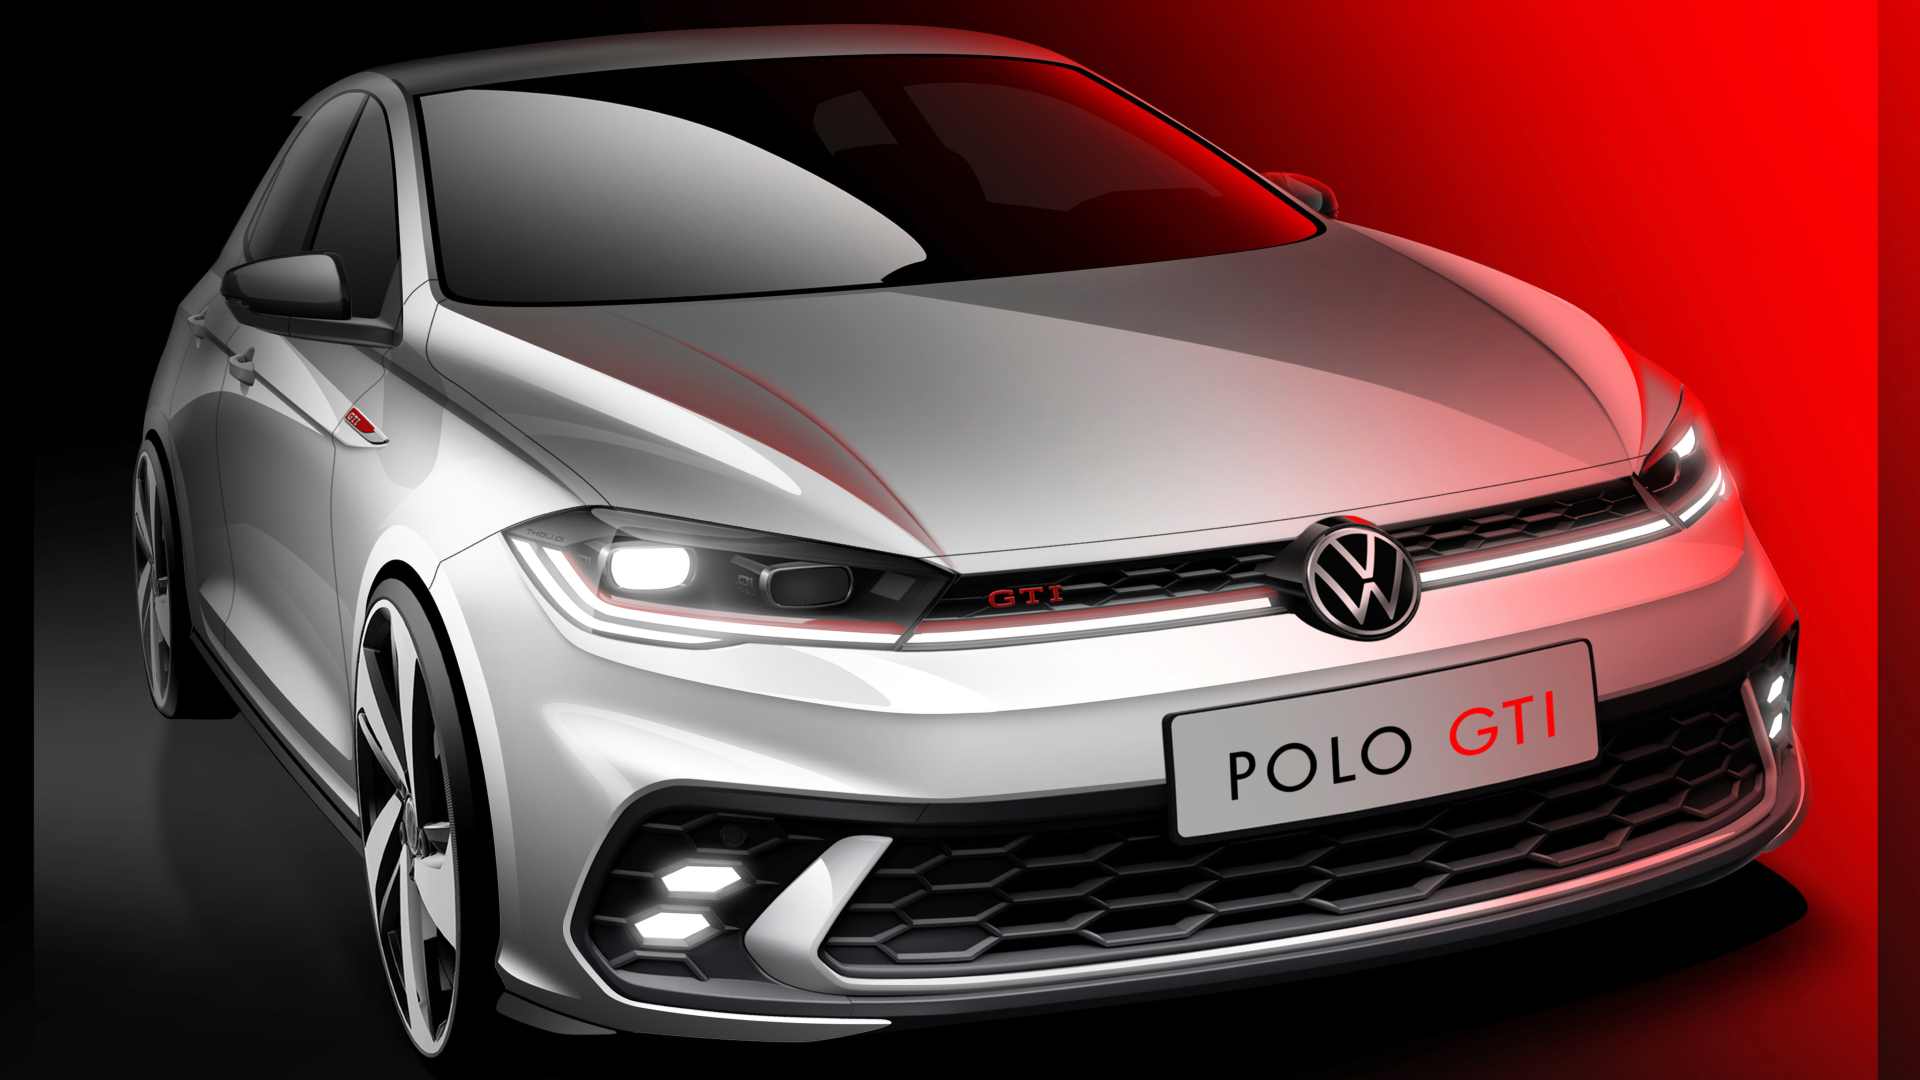 You are currently viewing Volkswagen Polo GTI facelift teased in design sketch ahead of world premiere in June- Technology News, FP